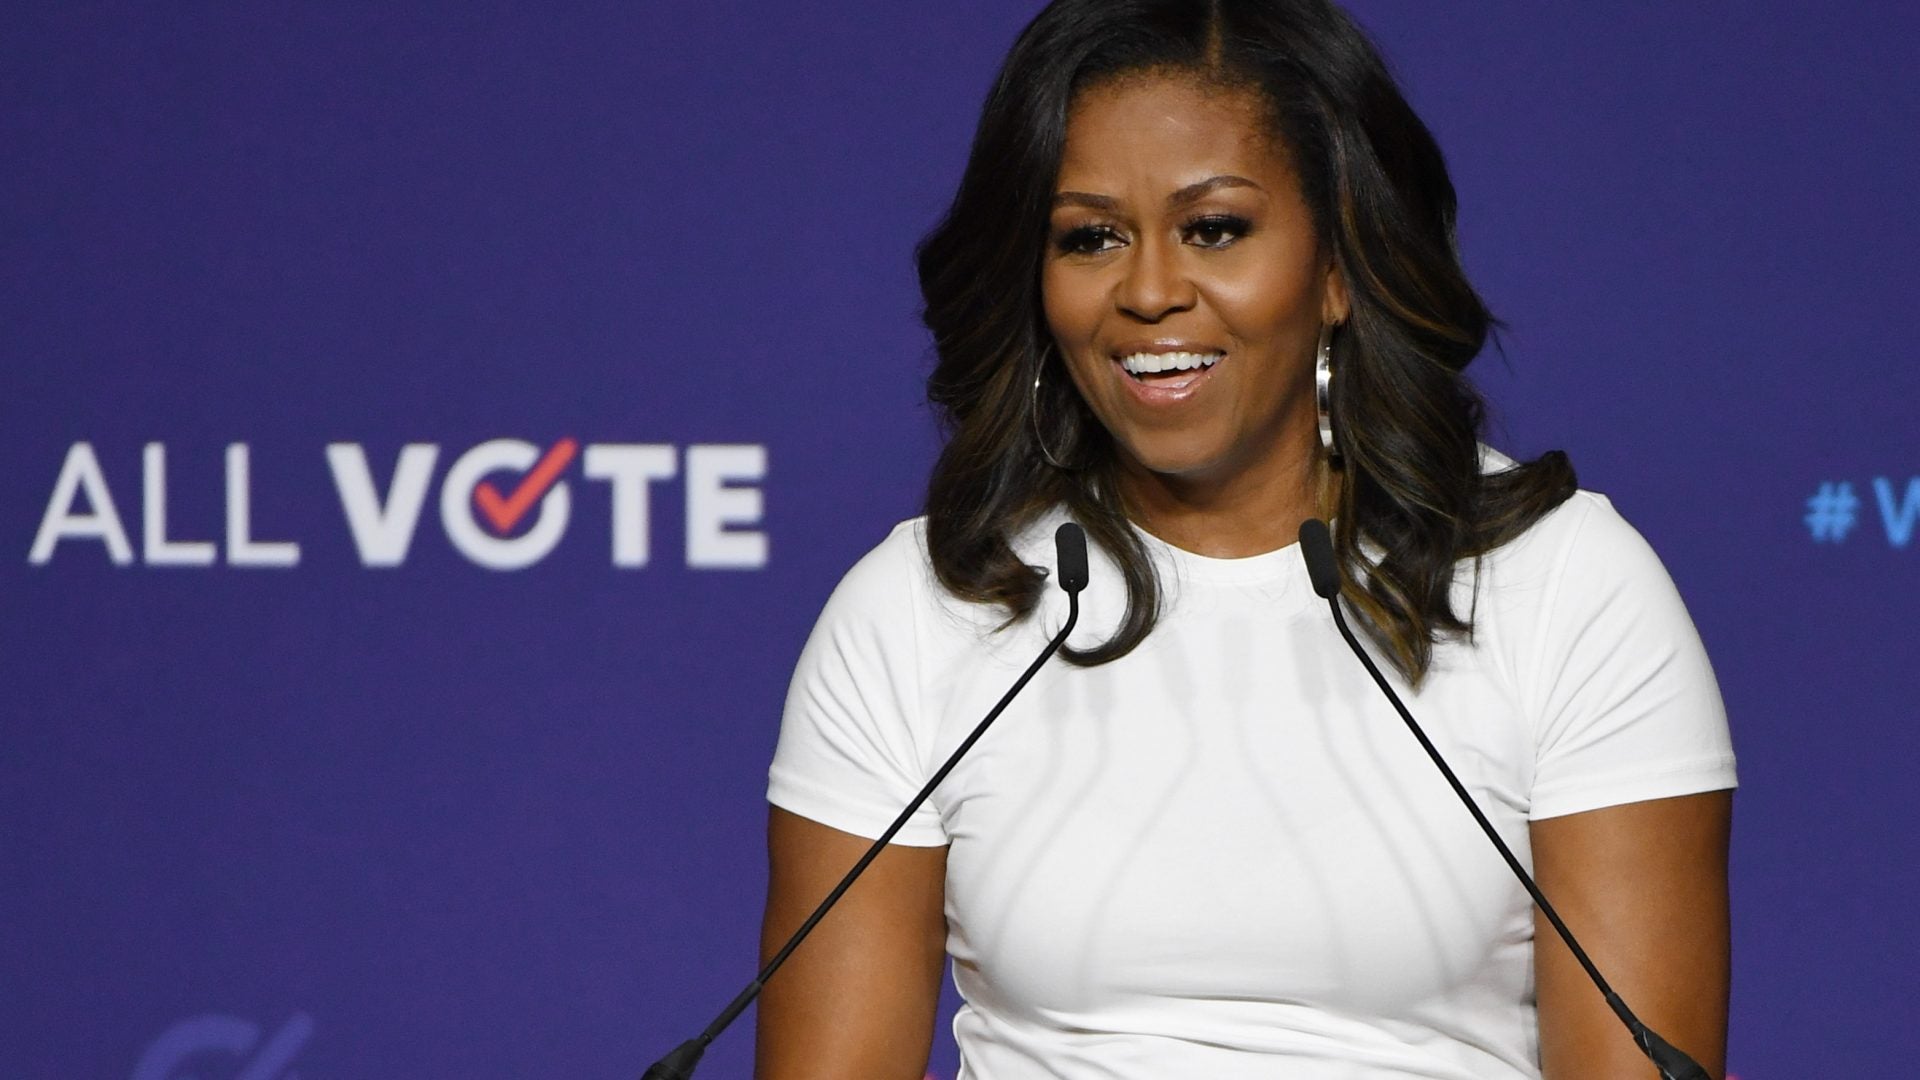 Michelle Obama-Backed Voting Organization Gives High Schools A Chance To Win Money For Prom